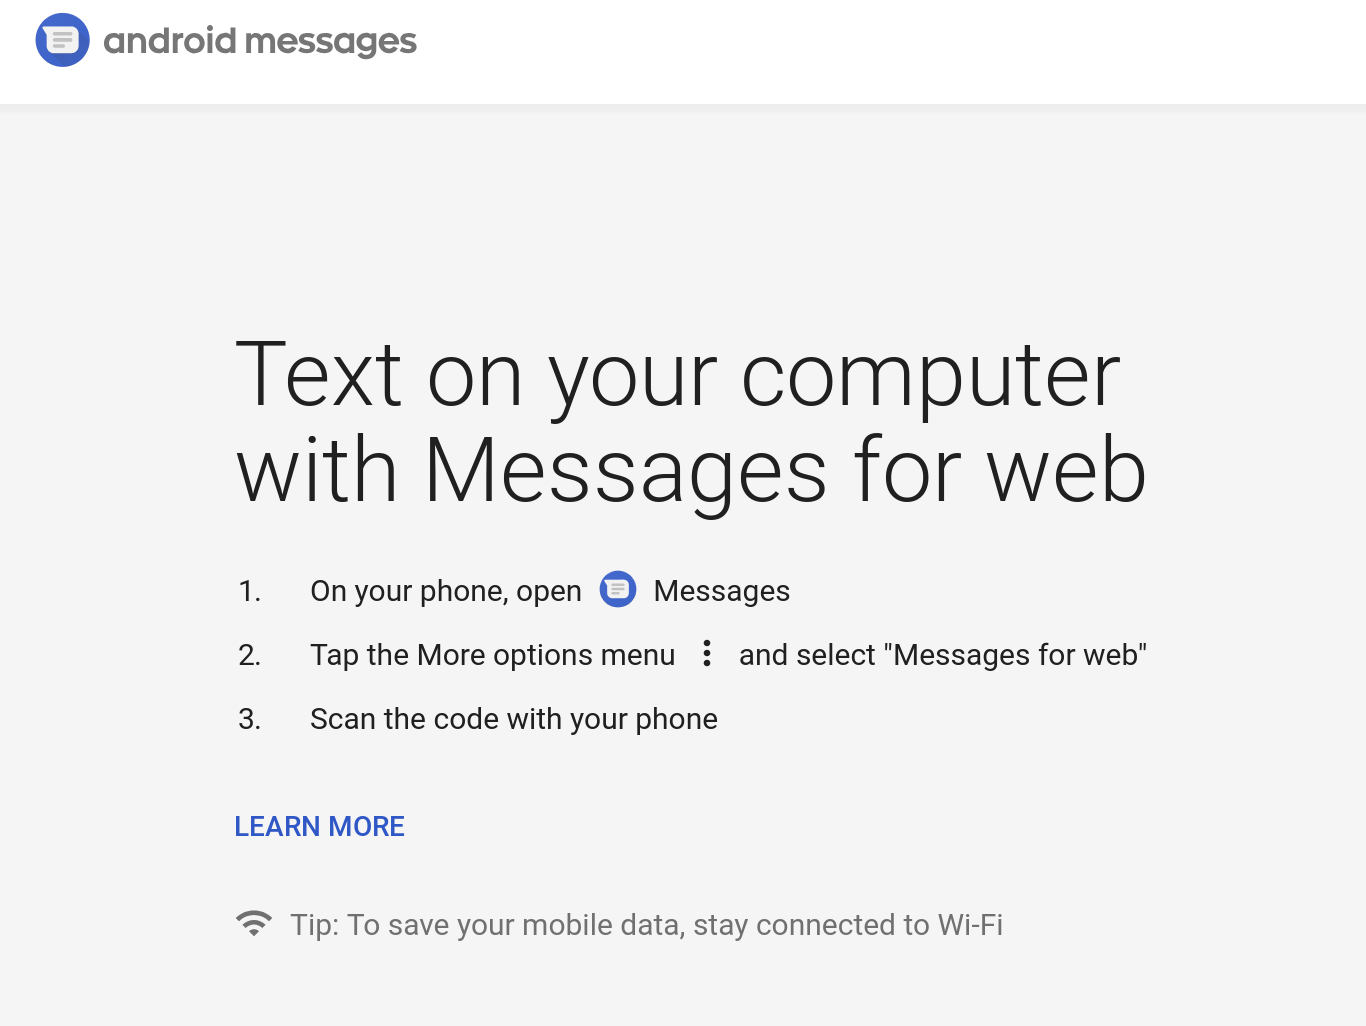 Google rolls out Android Messages support for Chromebooks and web browsers